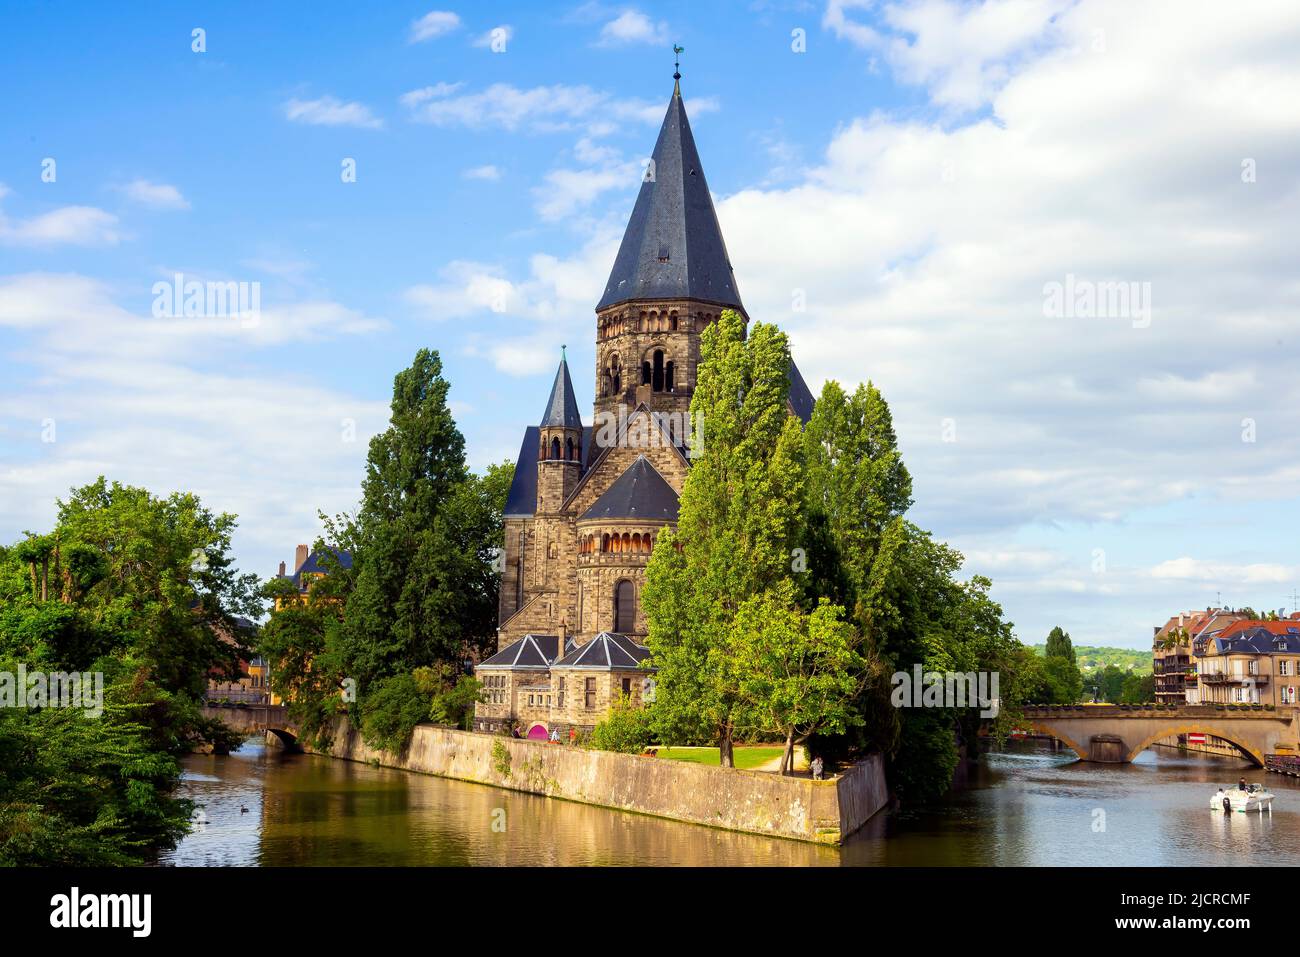 Temple Neuf is a Protestant church in Metz on Petit-Saulcy, which is surrounded by the Moselle. capital of Lorraine, France. Stock Photo